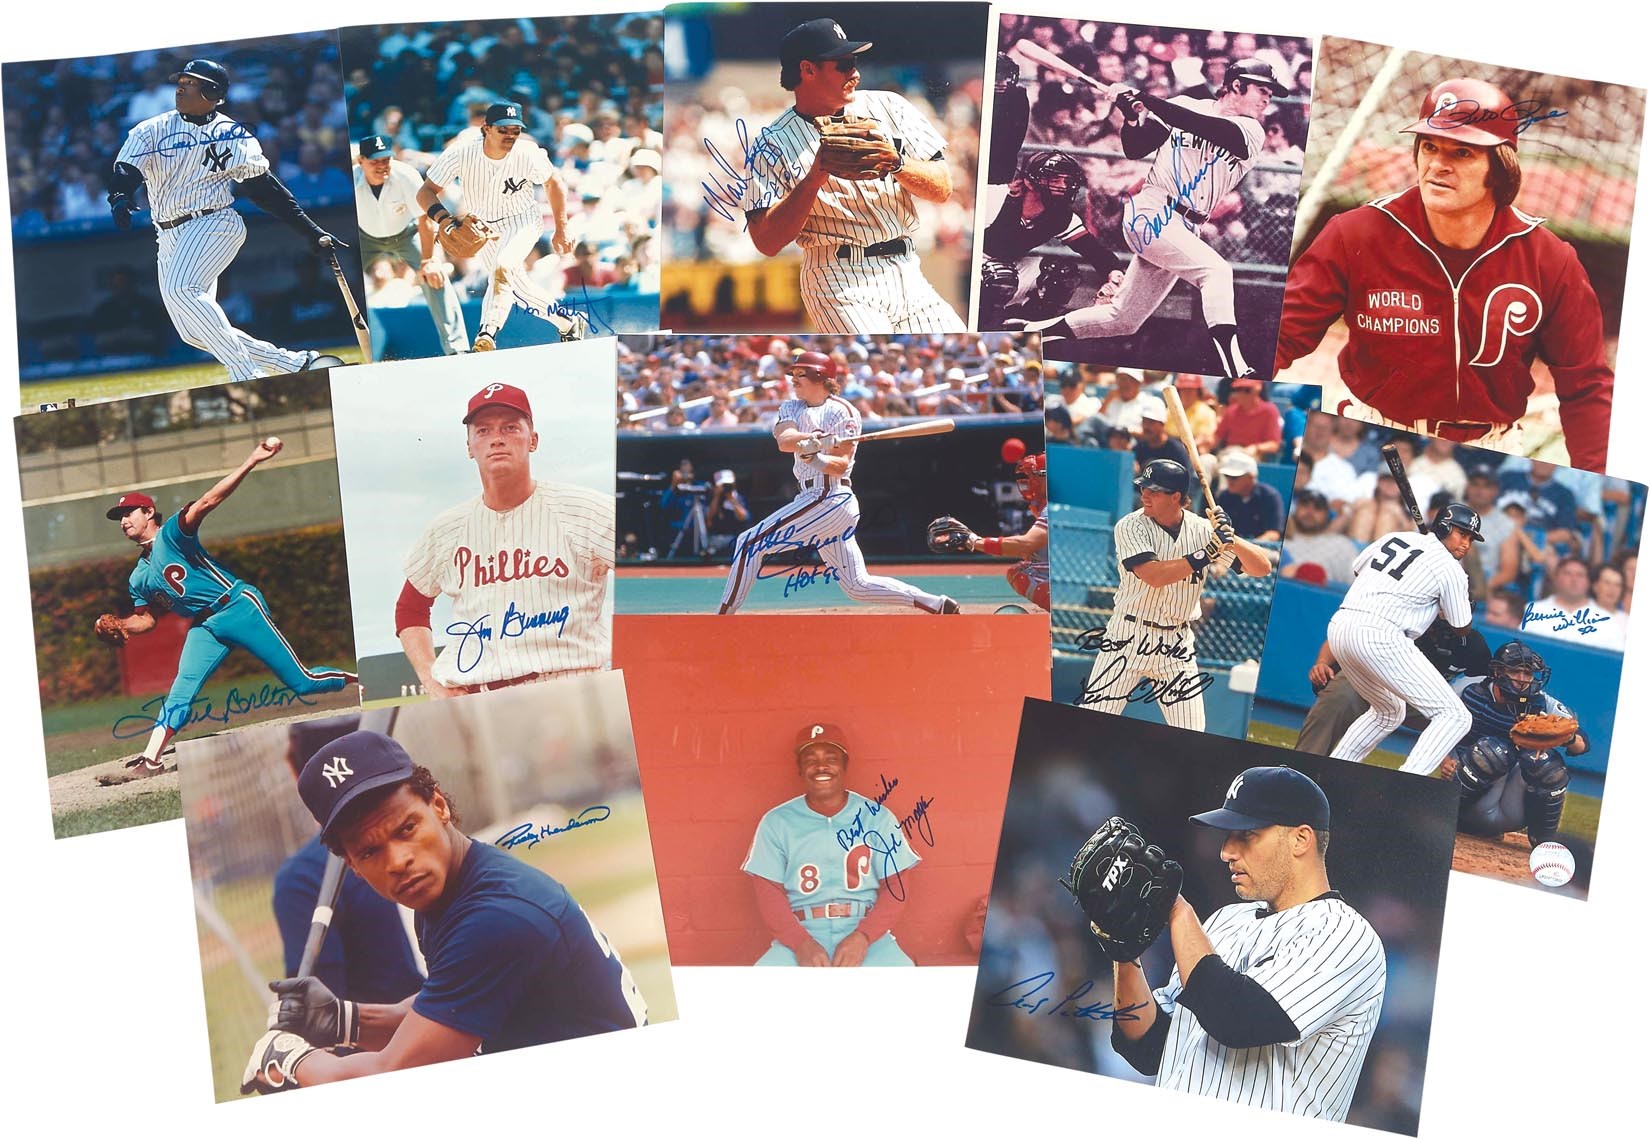 Baseball Autographs - NY Yankees & Philadelphia Phillies In-Person Signed 8x10s (550+)